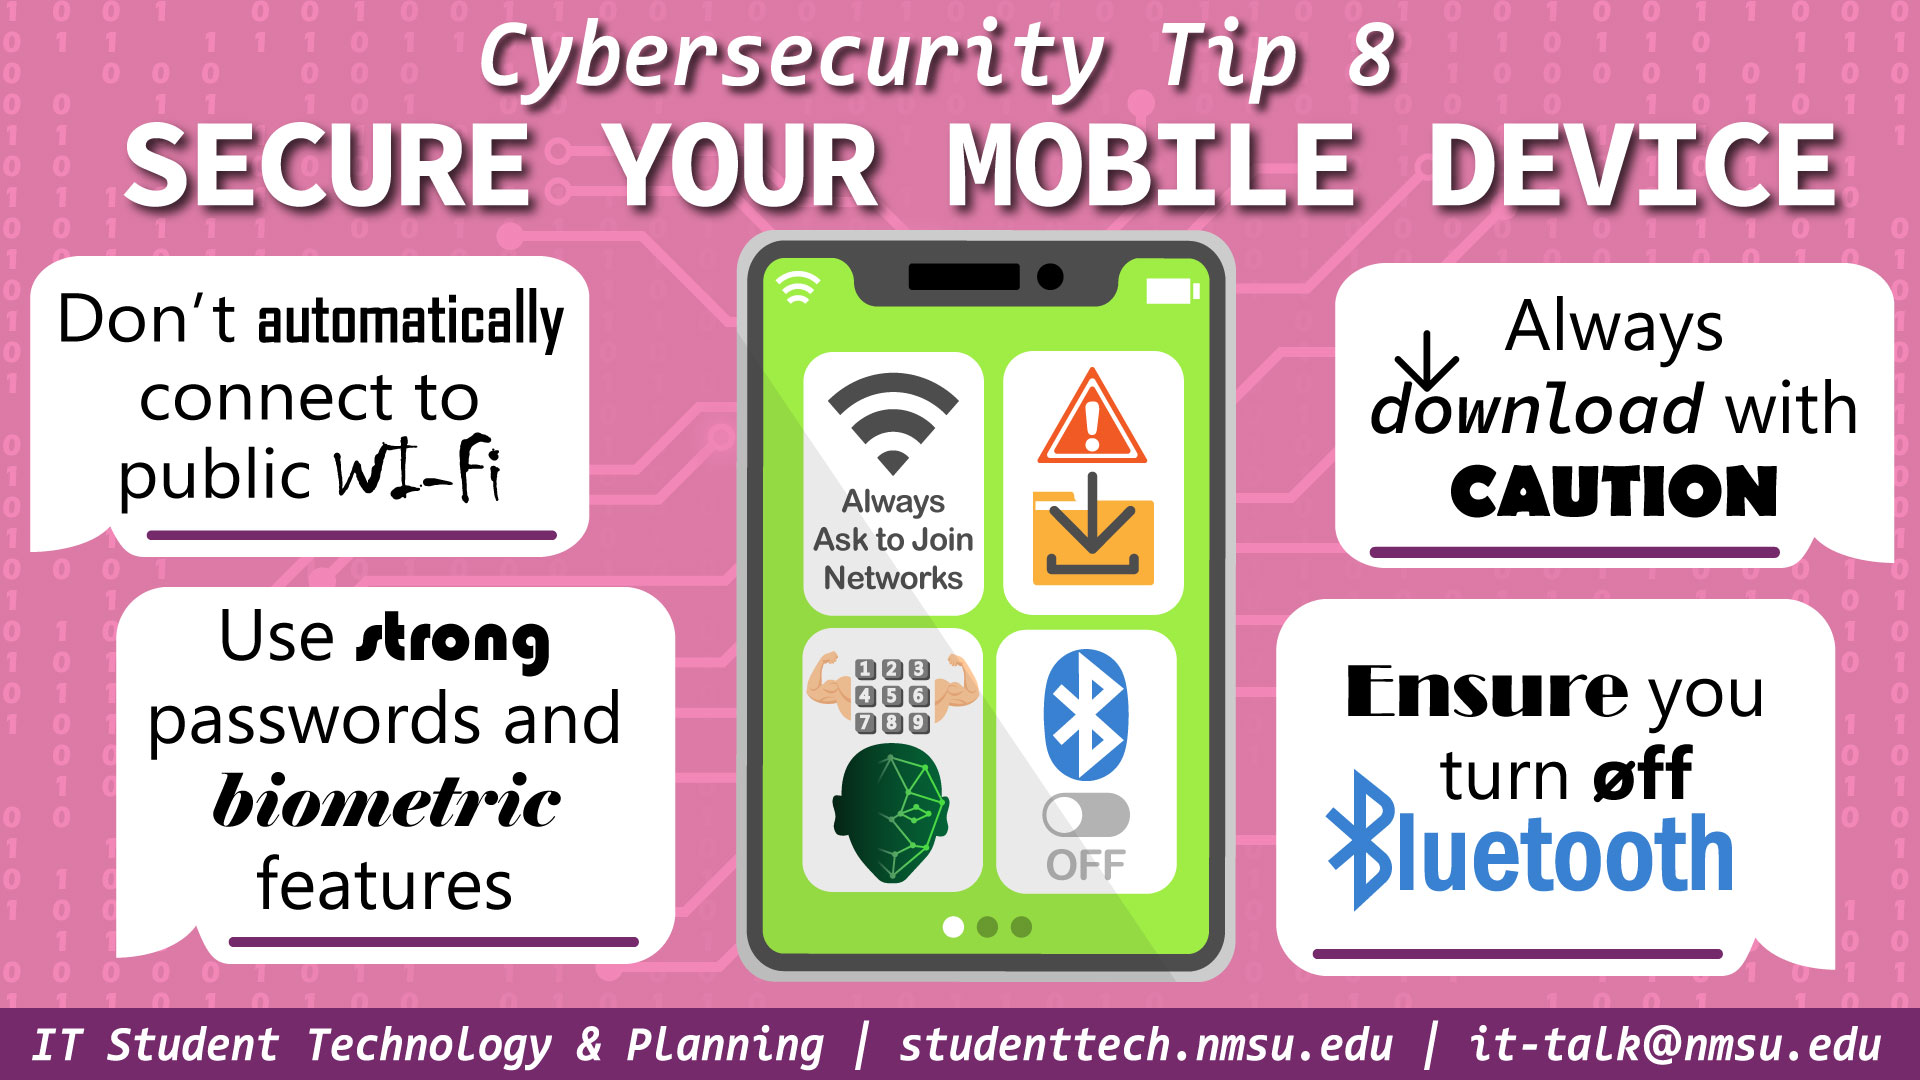 Secure your mobile device. Do not automatically connect to public wi-fi. Use strong passwords and biometric features. Always download with caution. Ensure you turn off bluetooth.